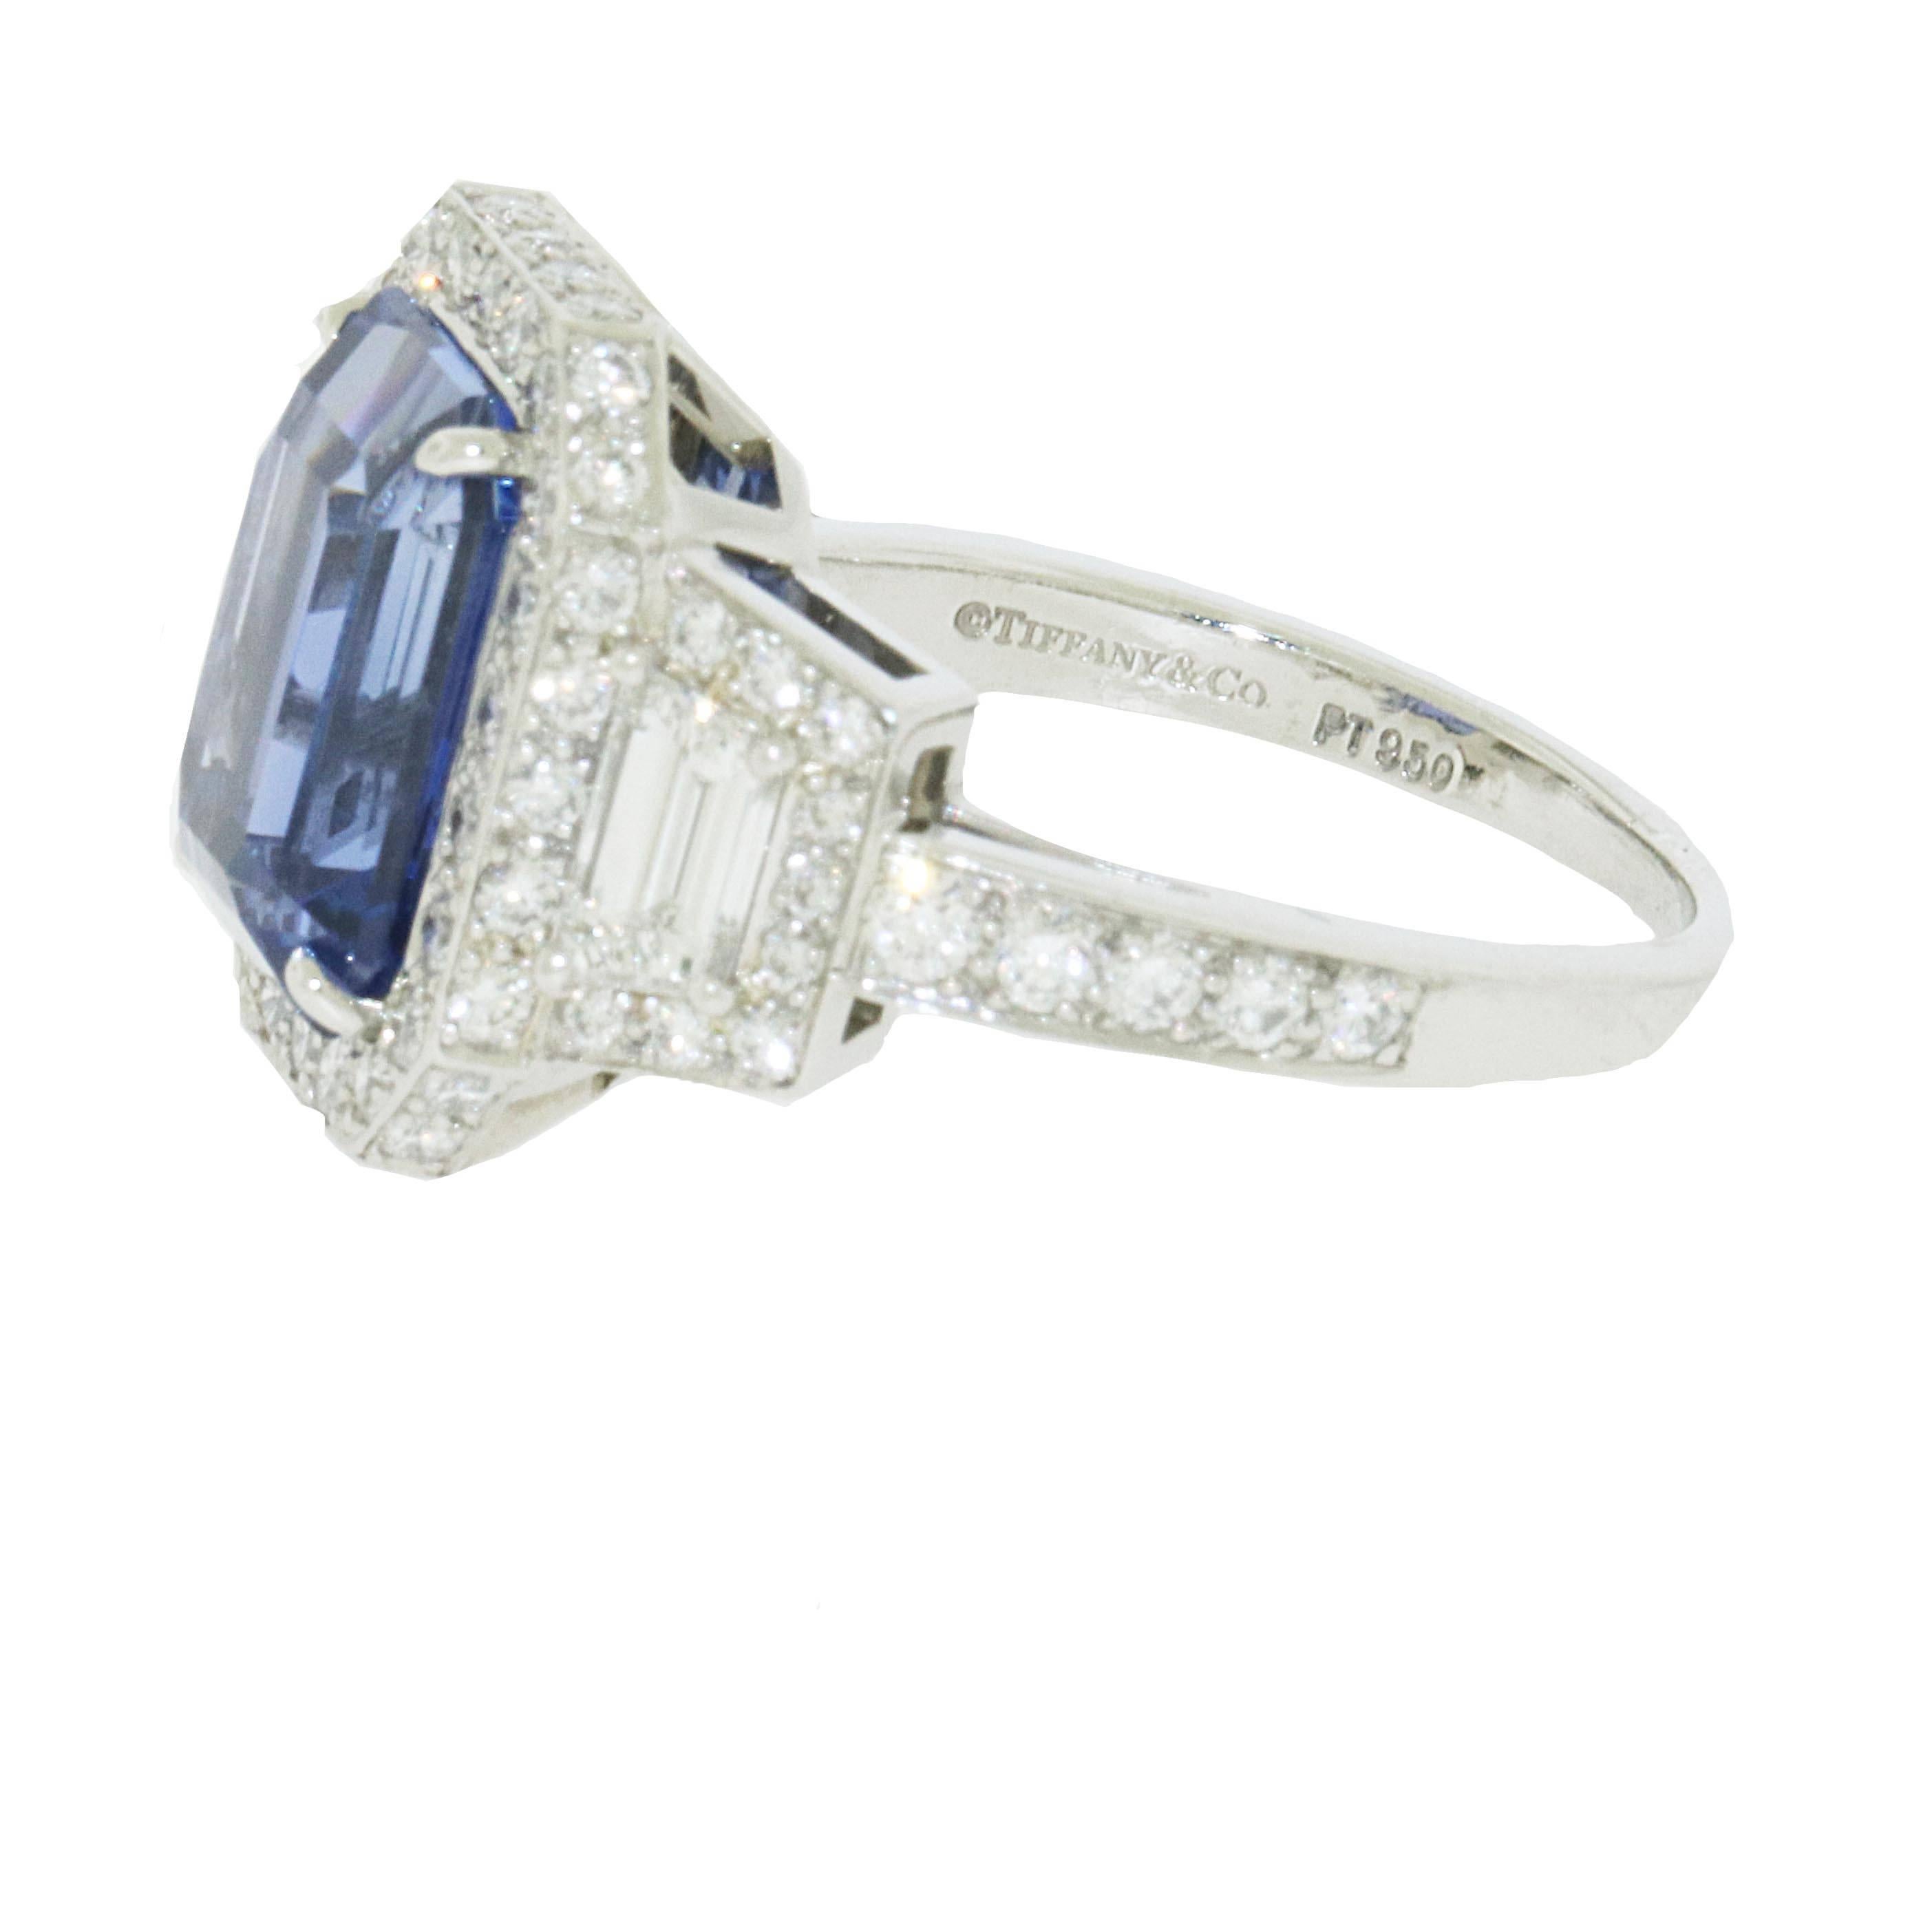 Most gorgeous Tiffany and Co. diamond and sapphire ring. The ring has a blue sapphire in the center with excellent color and clarity. The weight of the sapphire is 5.62 carats. It is surrounded by 2 trapezoid diamonds weighing 0.55 carats in total.